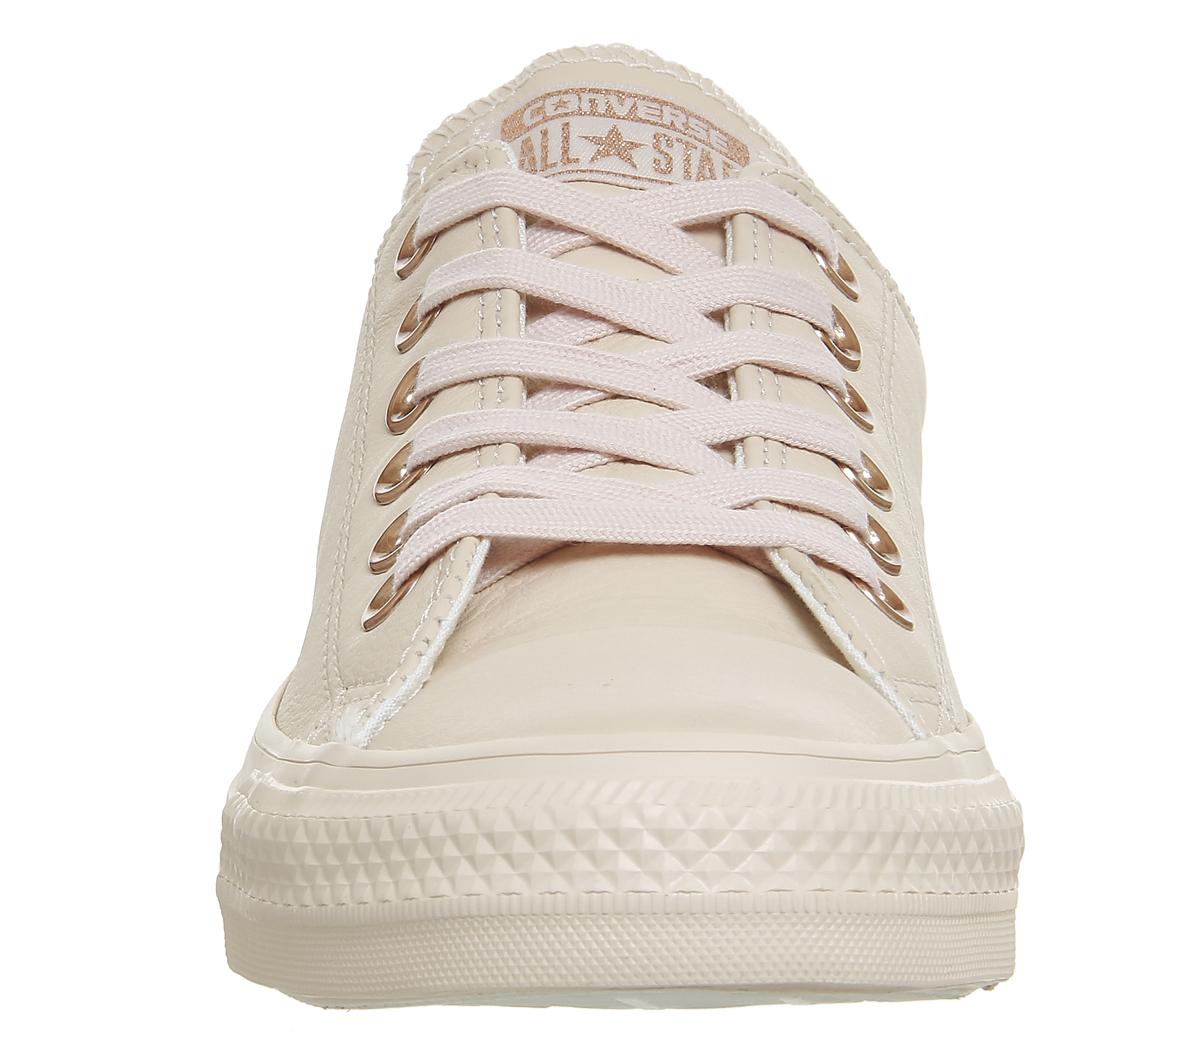 Converse All Star Low Leather Pastel Rose Tan Rose Gold - Hers trainers